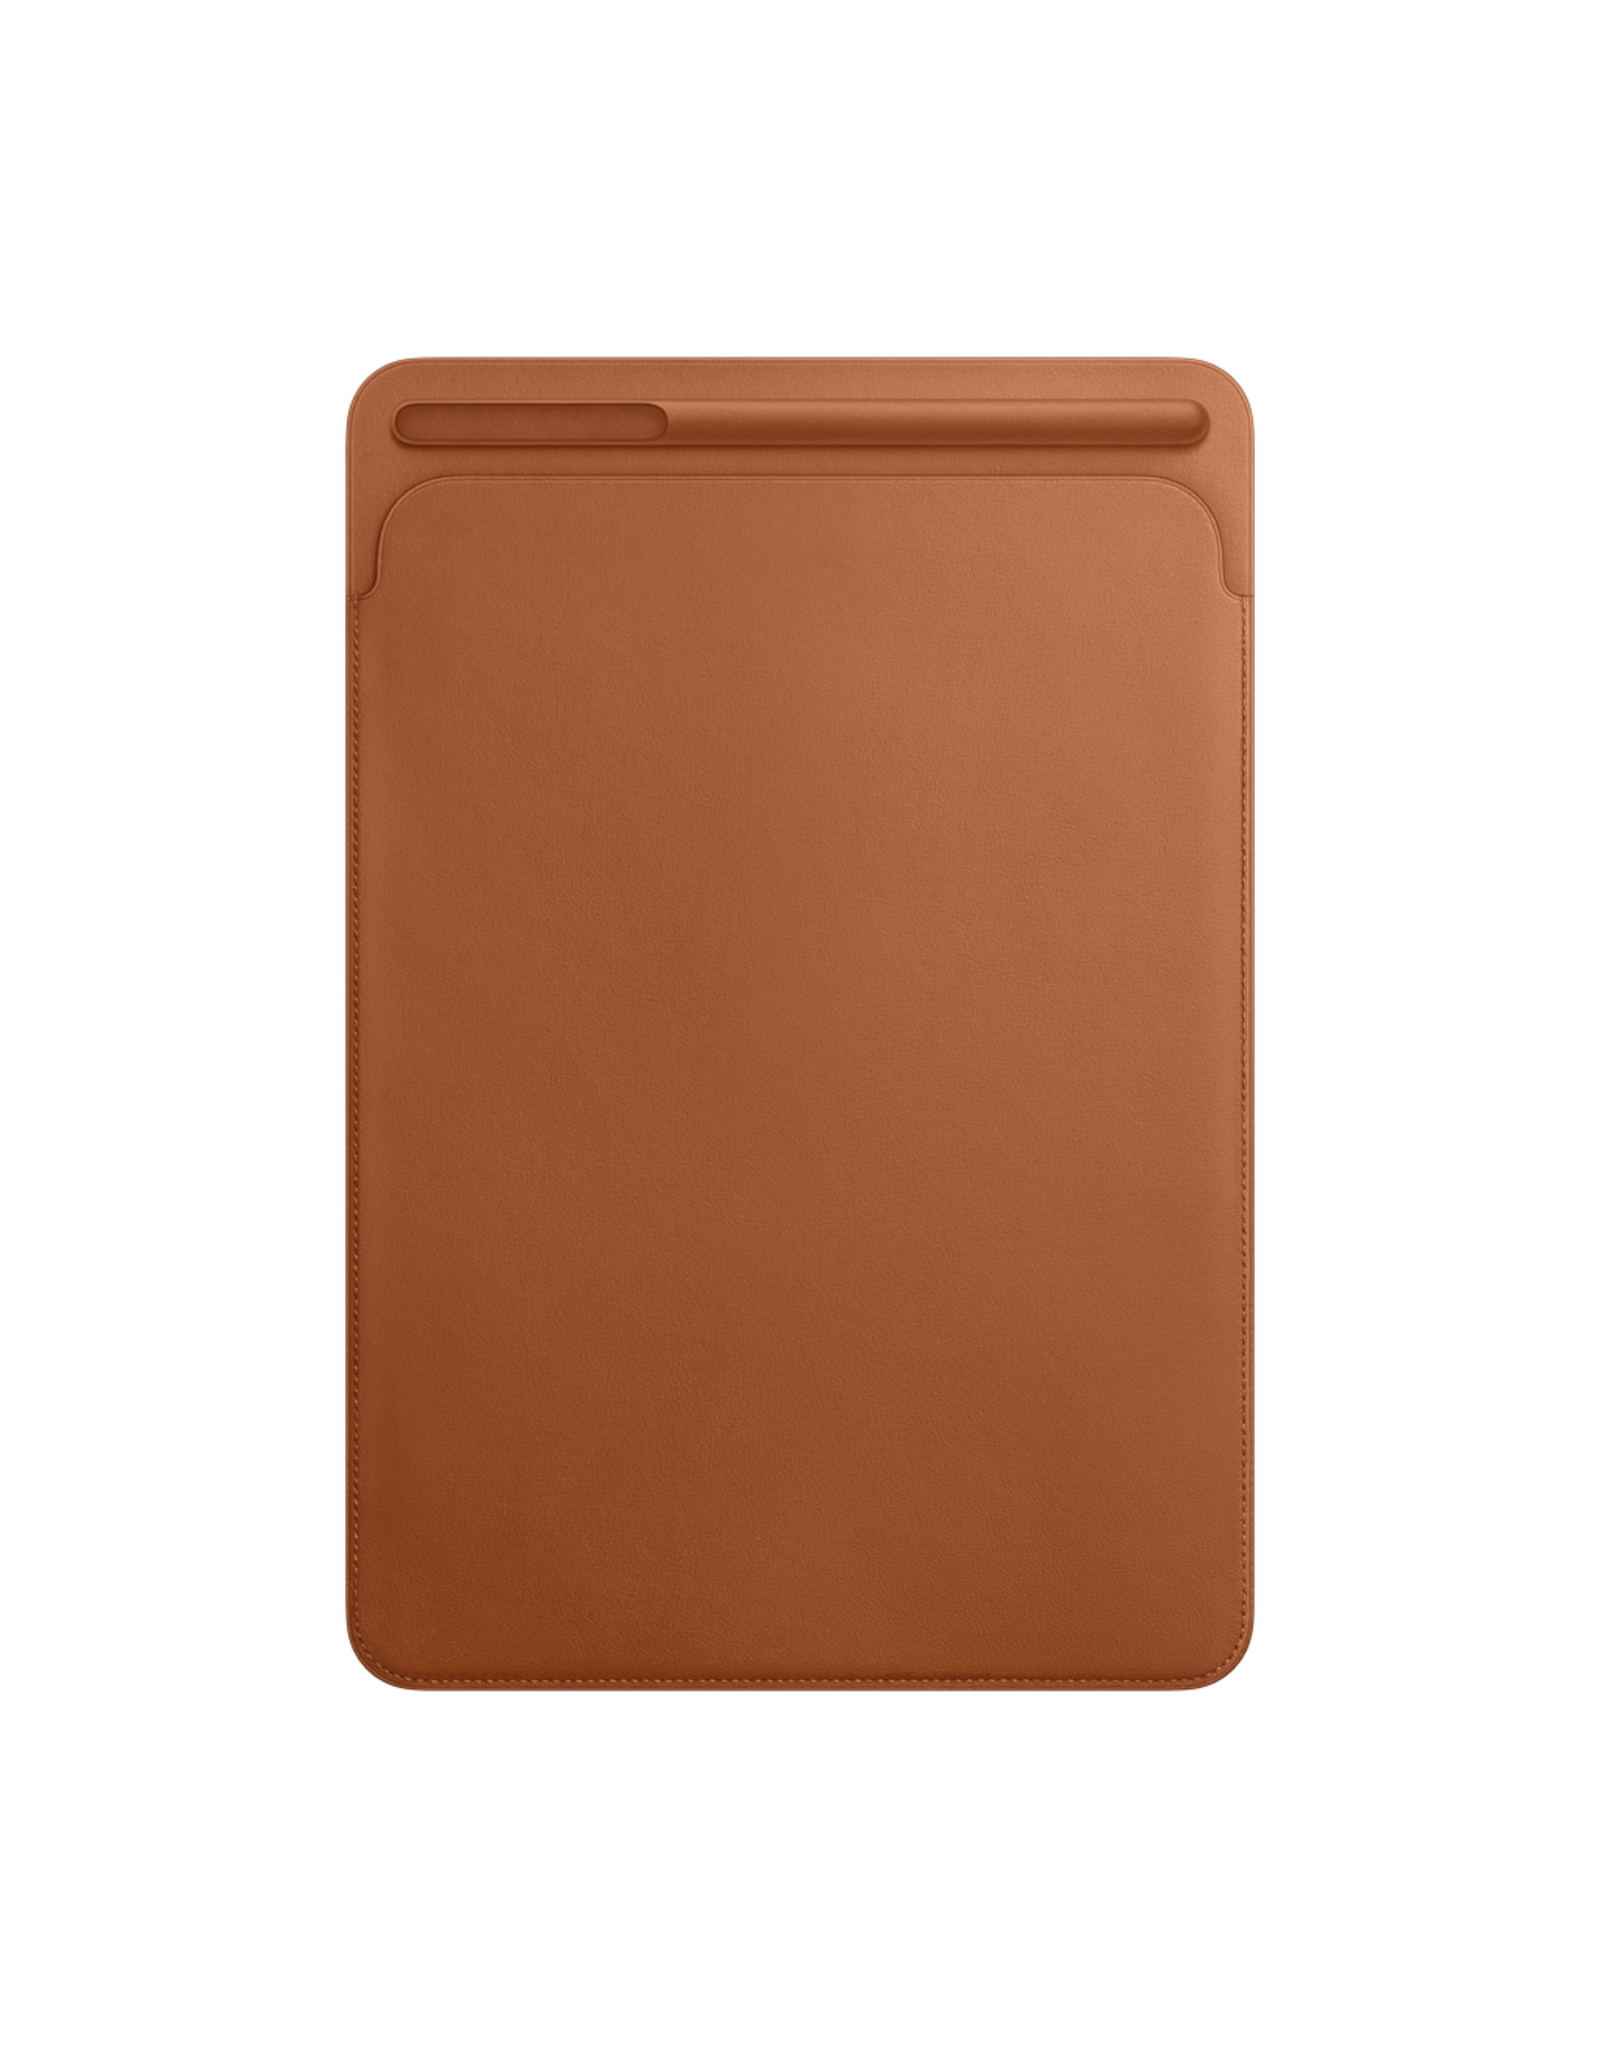 Apple Apple Leather Sleeve for 10.5-inch iPad Pro - Saddle Brown